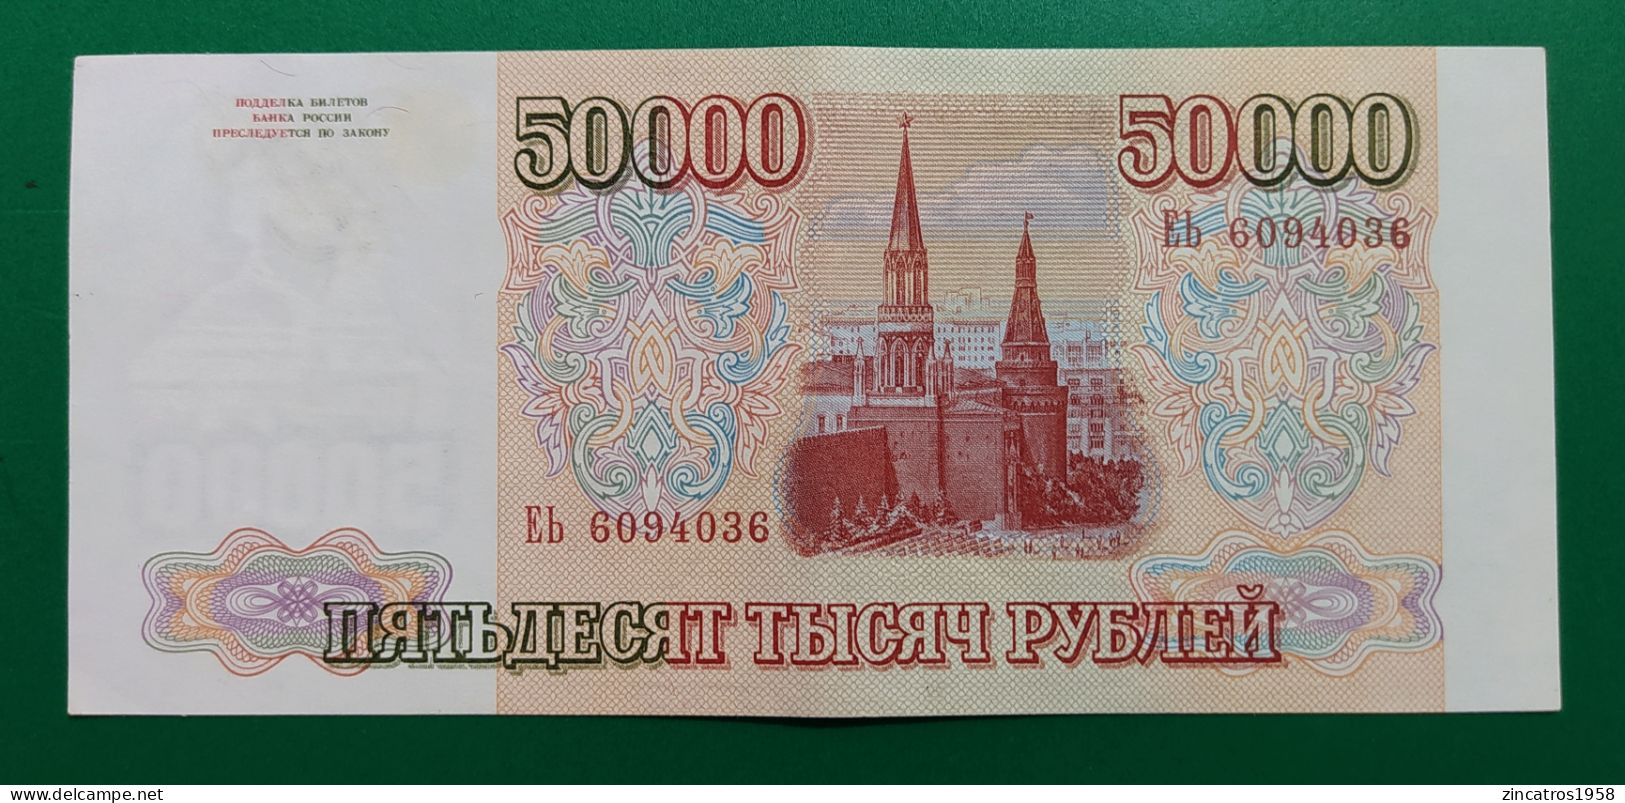 Russia / Russie 50000 Rubles 1994 / Very Rare P. 260b / Very High Conditions + - Russia